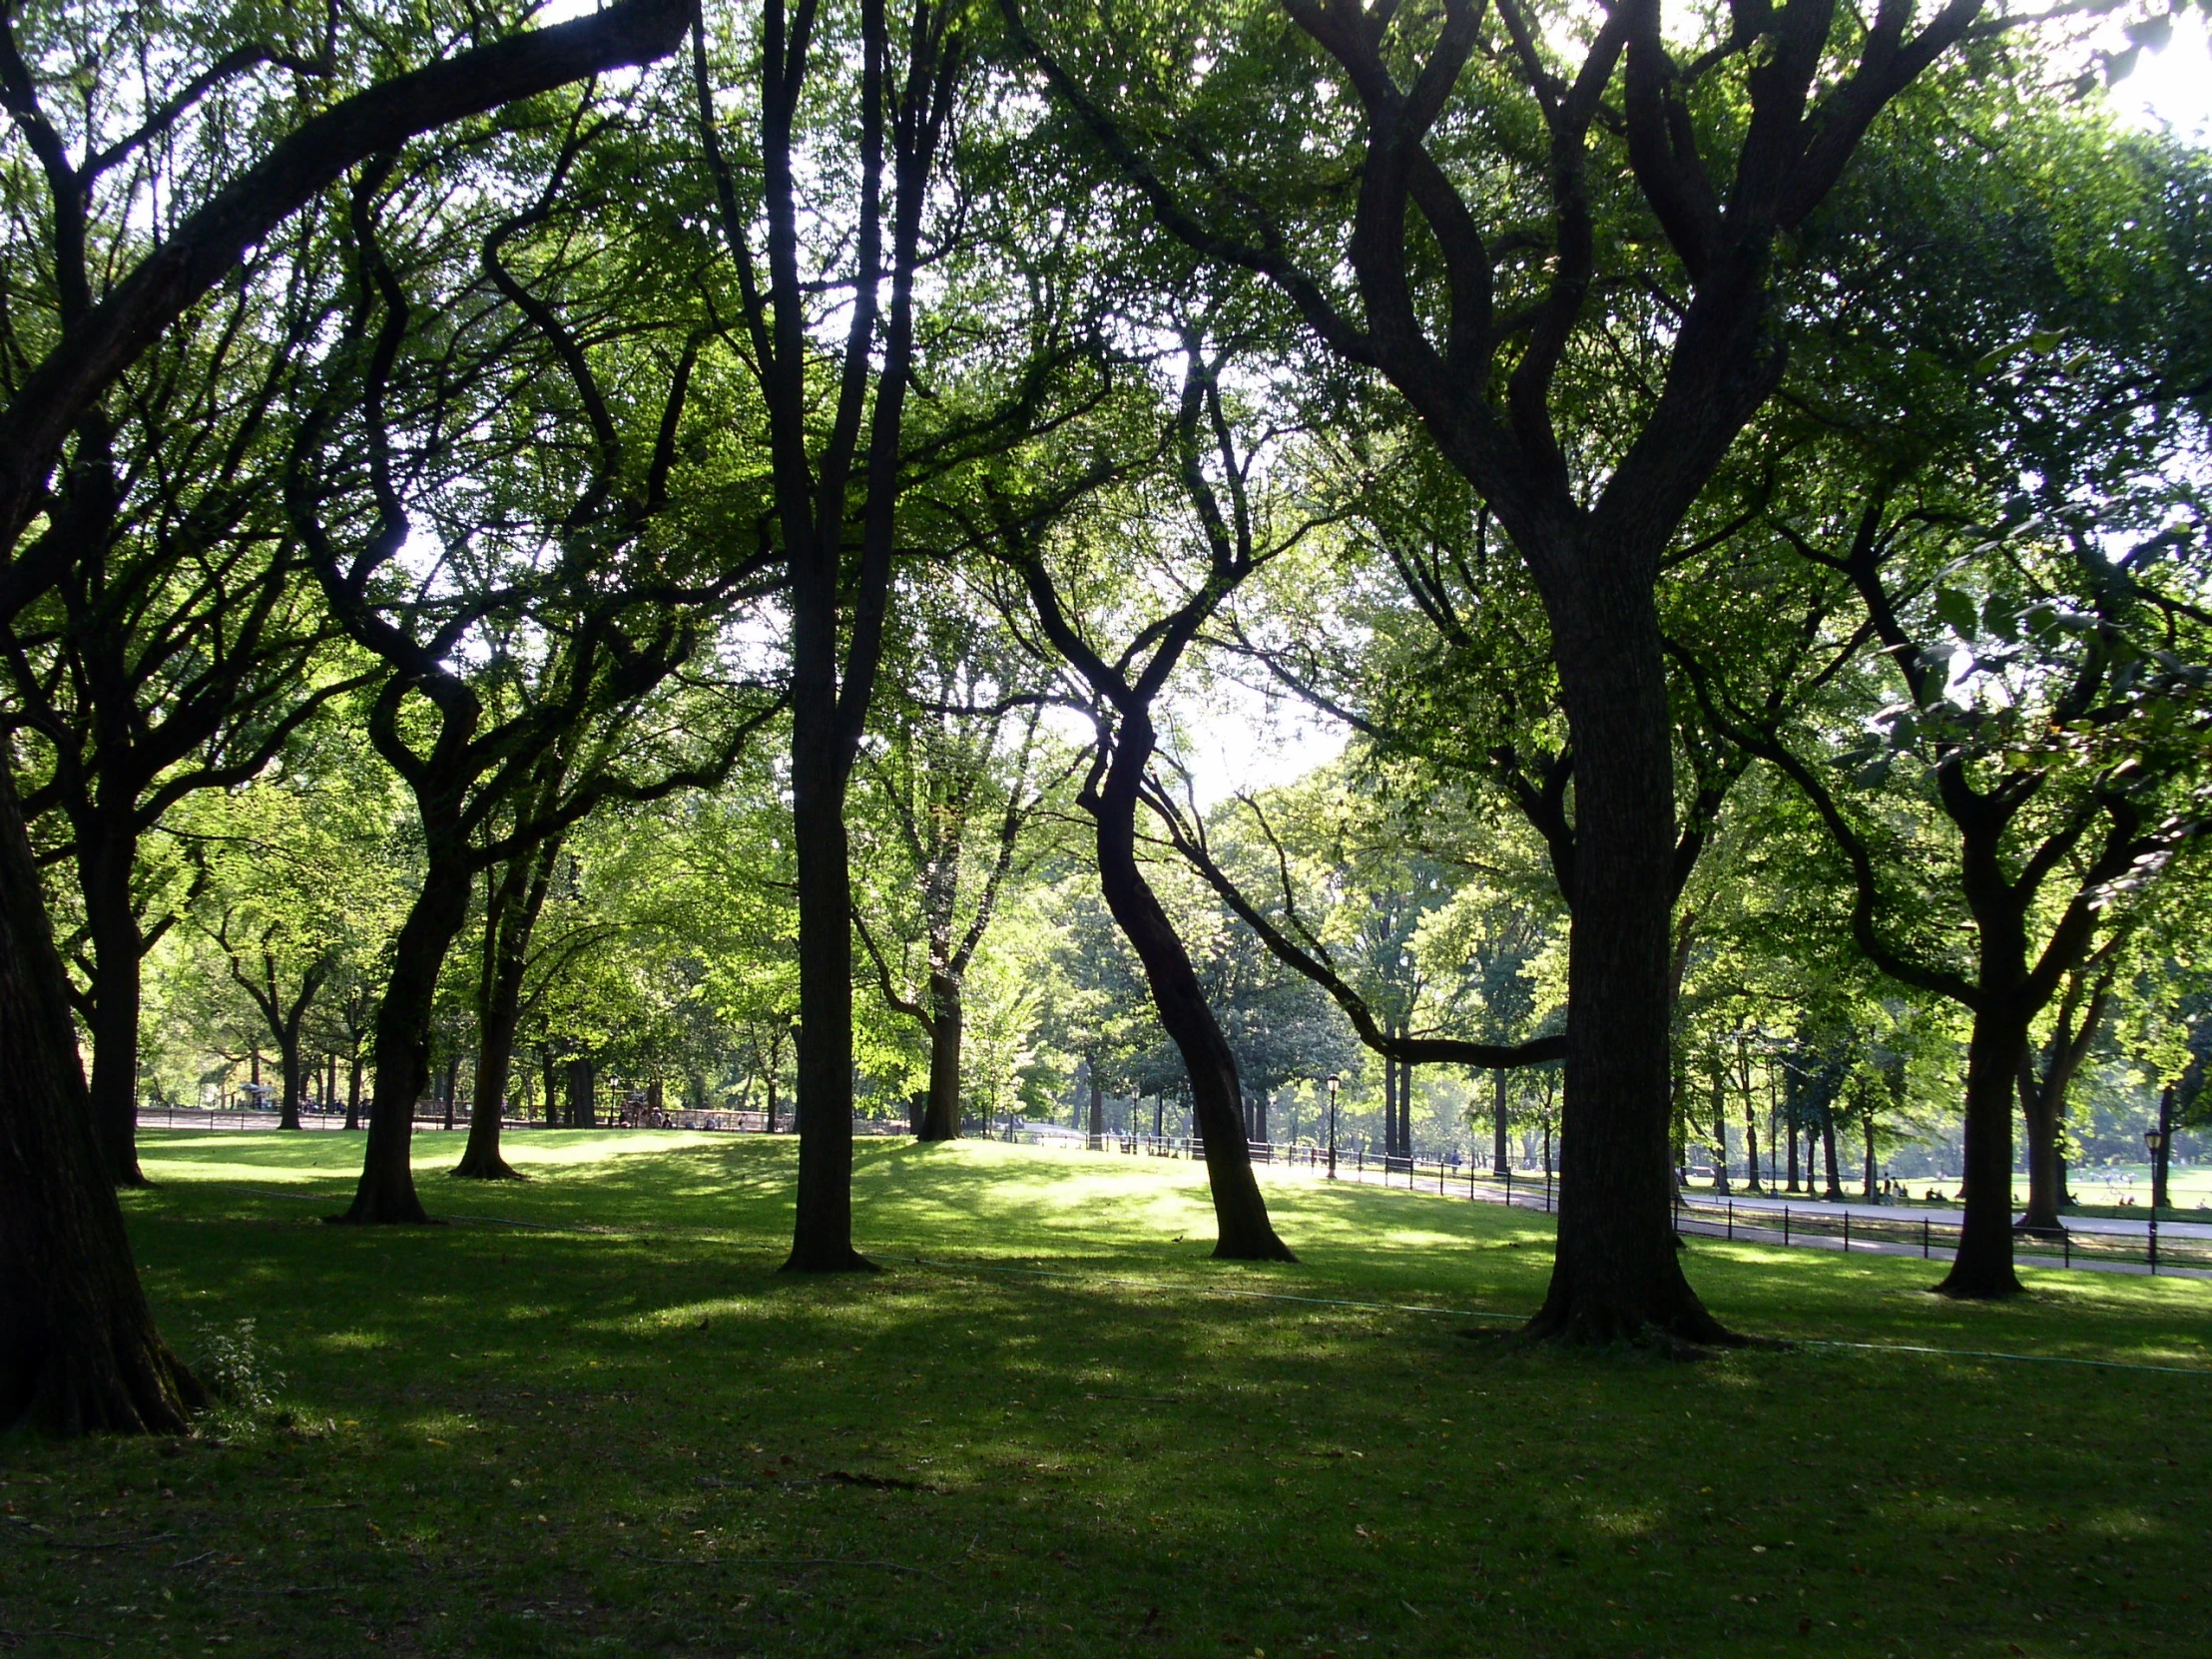 several trees in the grass in a park